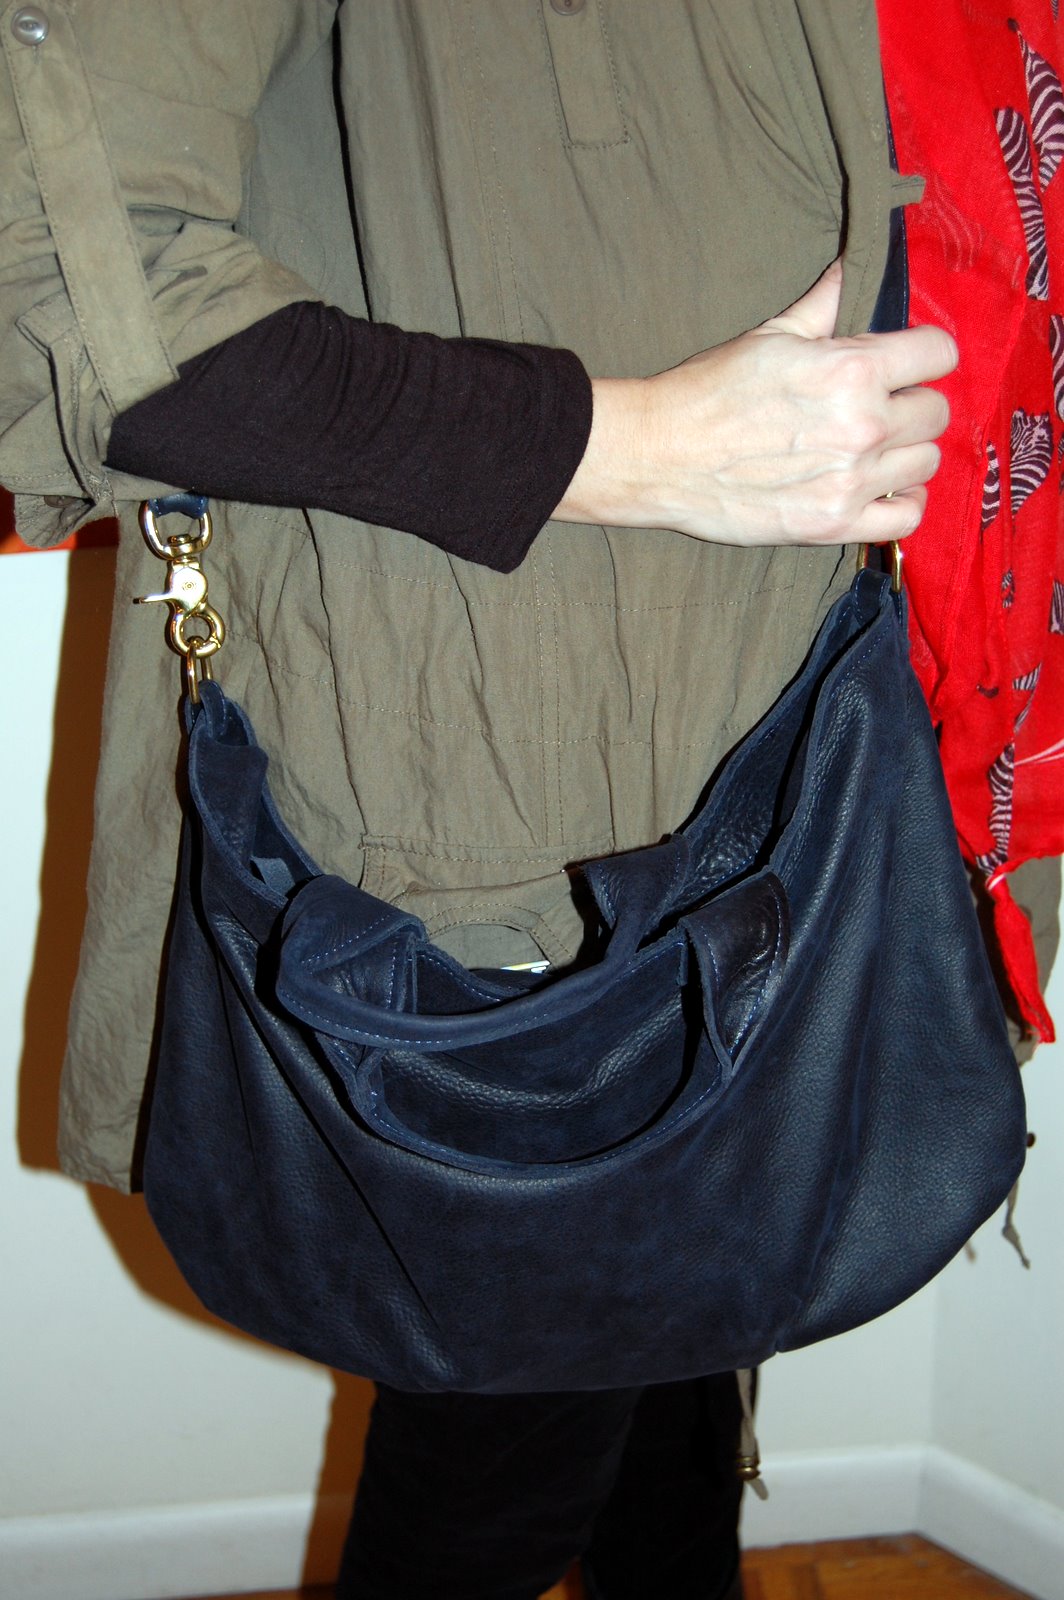 Clare Vivier classic Messenger bag with top handles